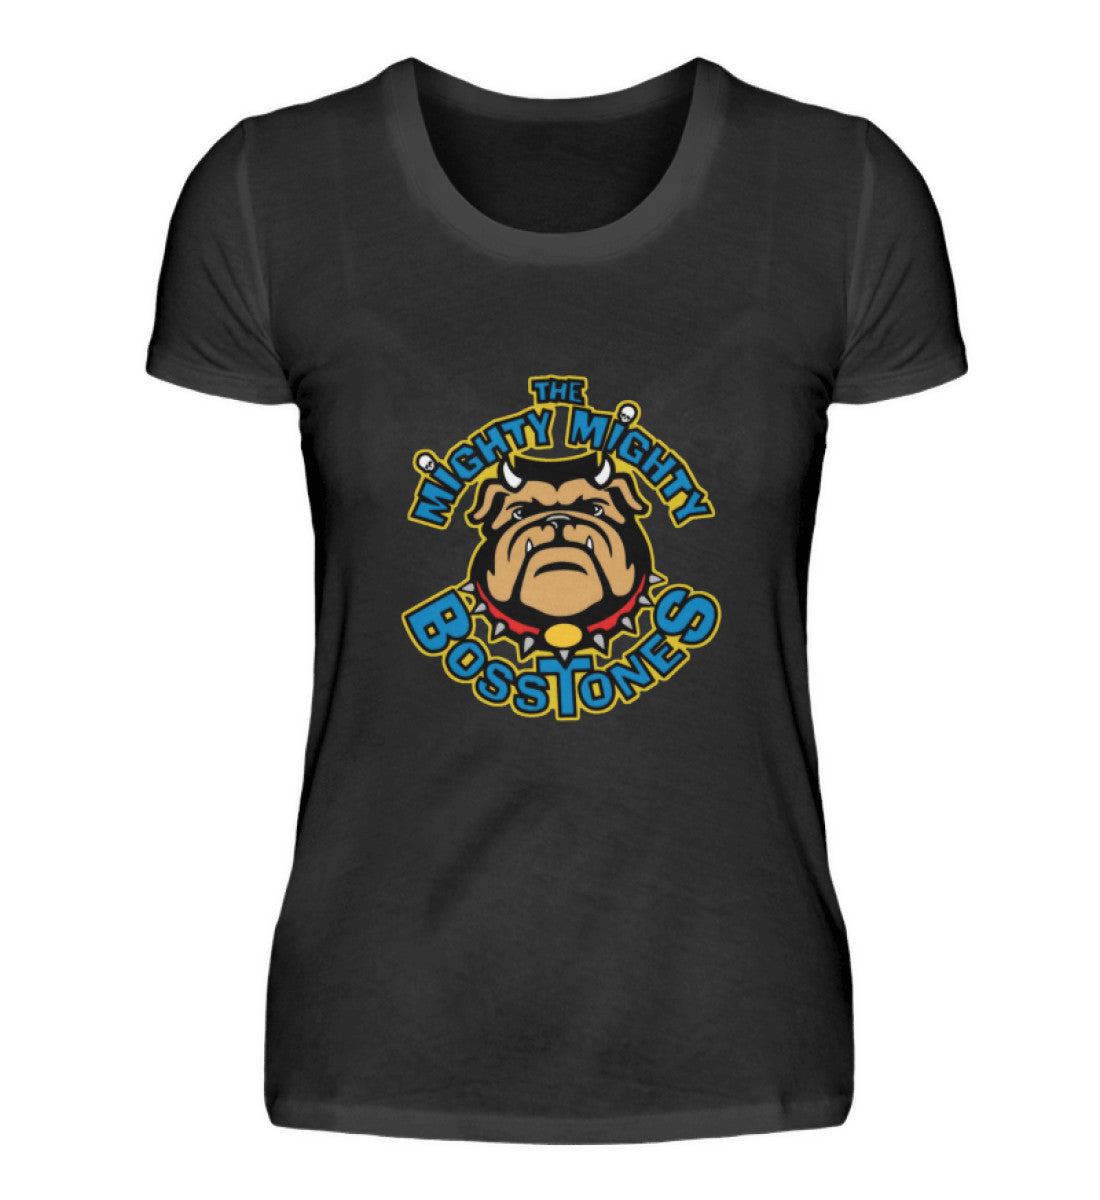 The Mighty Mighty Bosstones T-Shirt Women